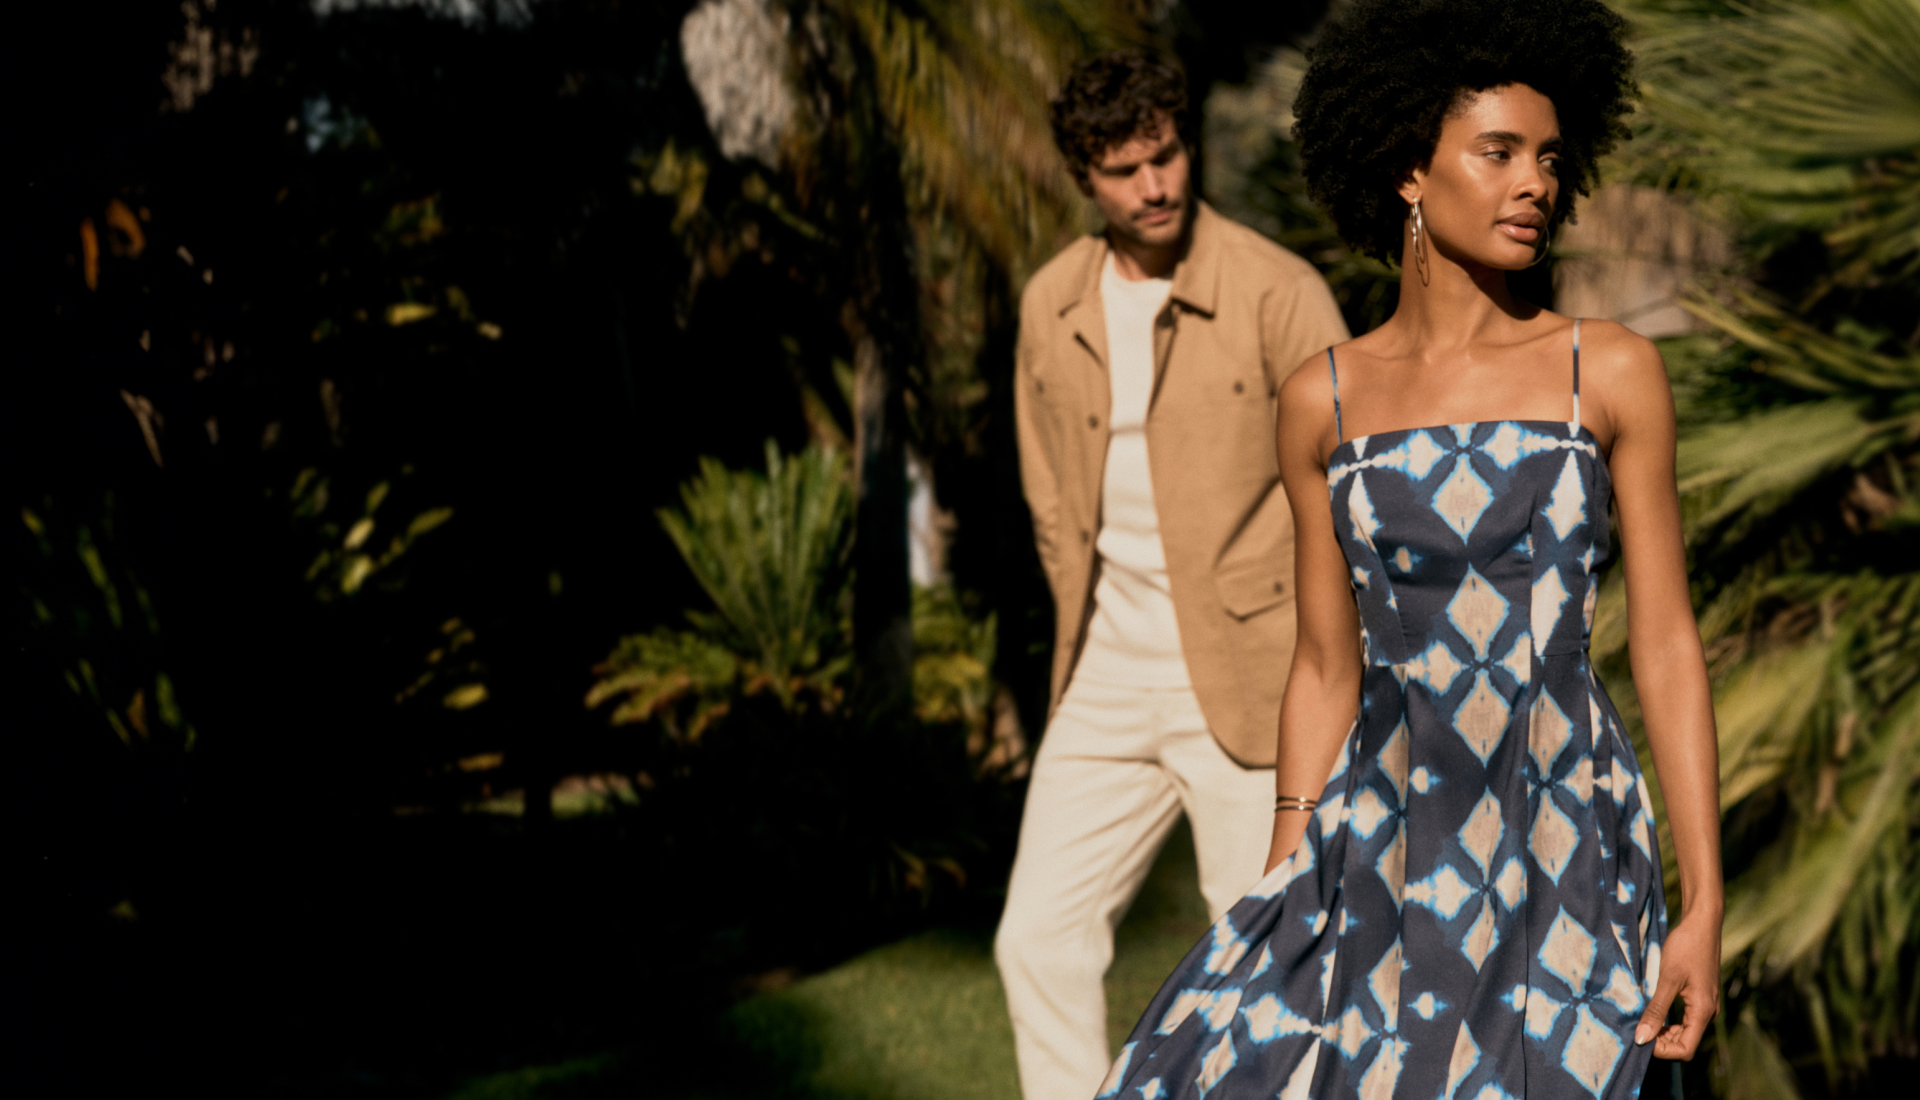 The June Collection. Introducing our latest versatile styles made to do it all, going from weekend getaways to summer weddings with ease.